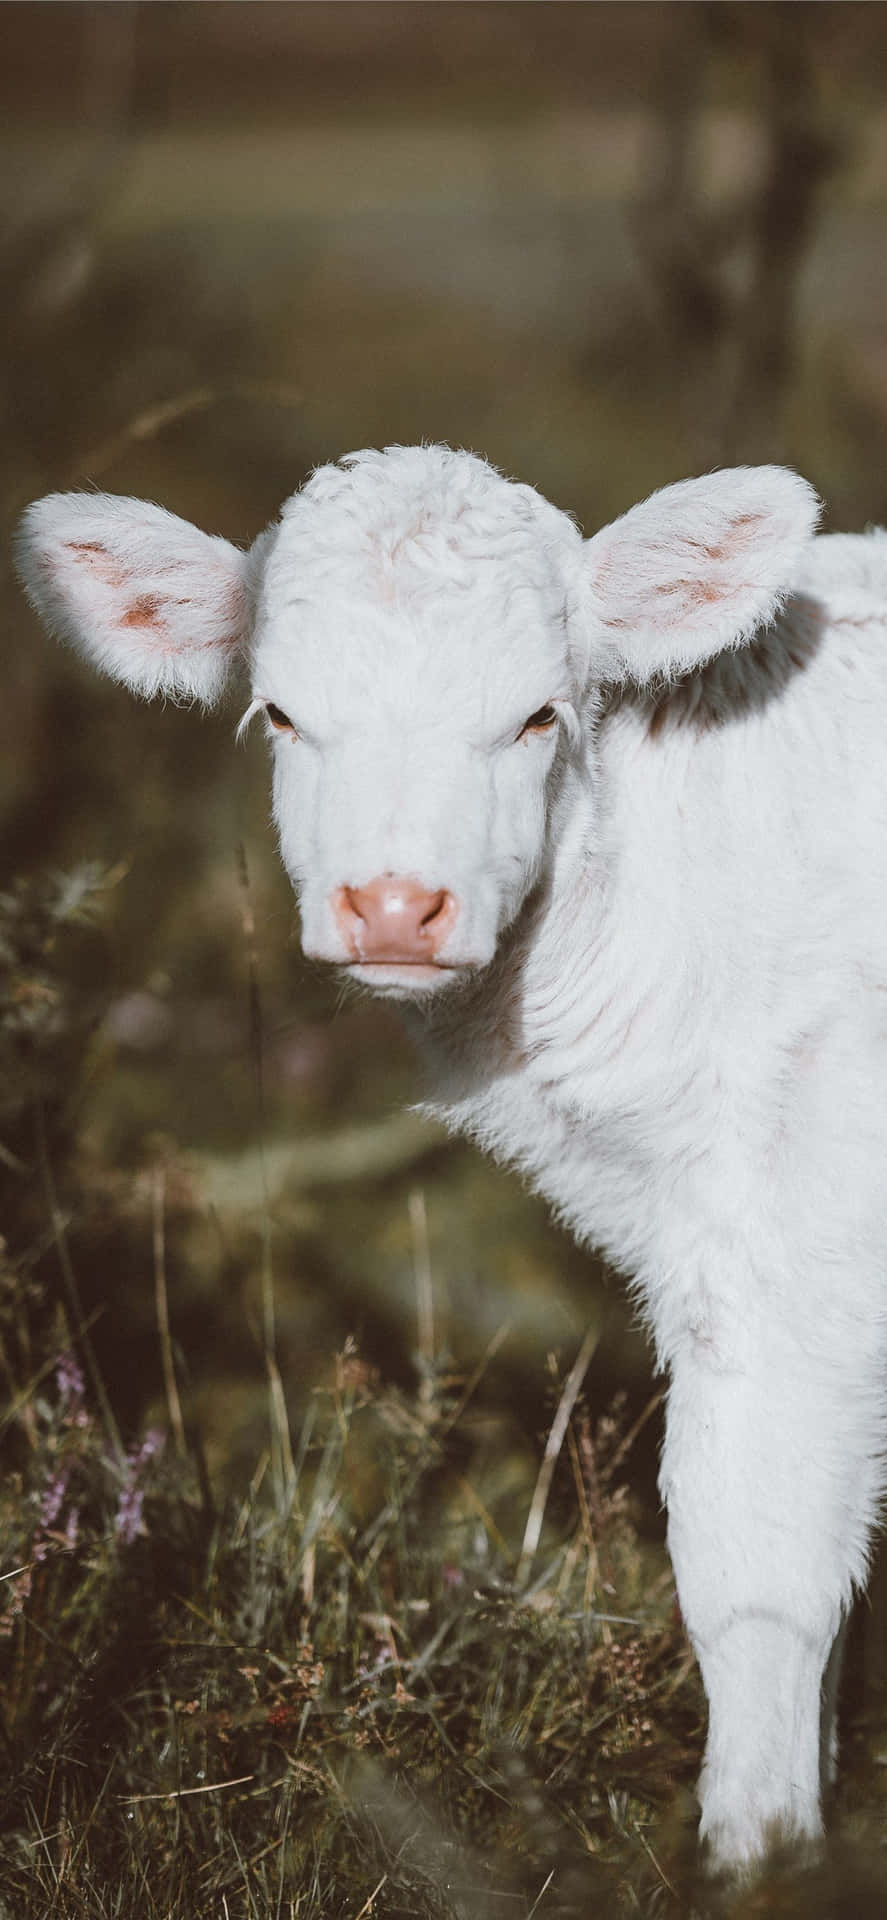 A White Calf Standing In The Grass Wallpaper